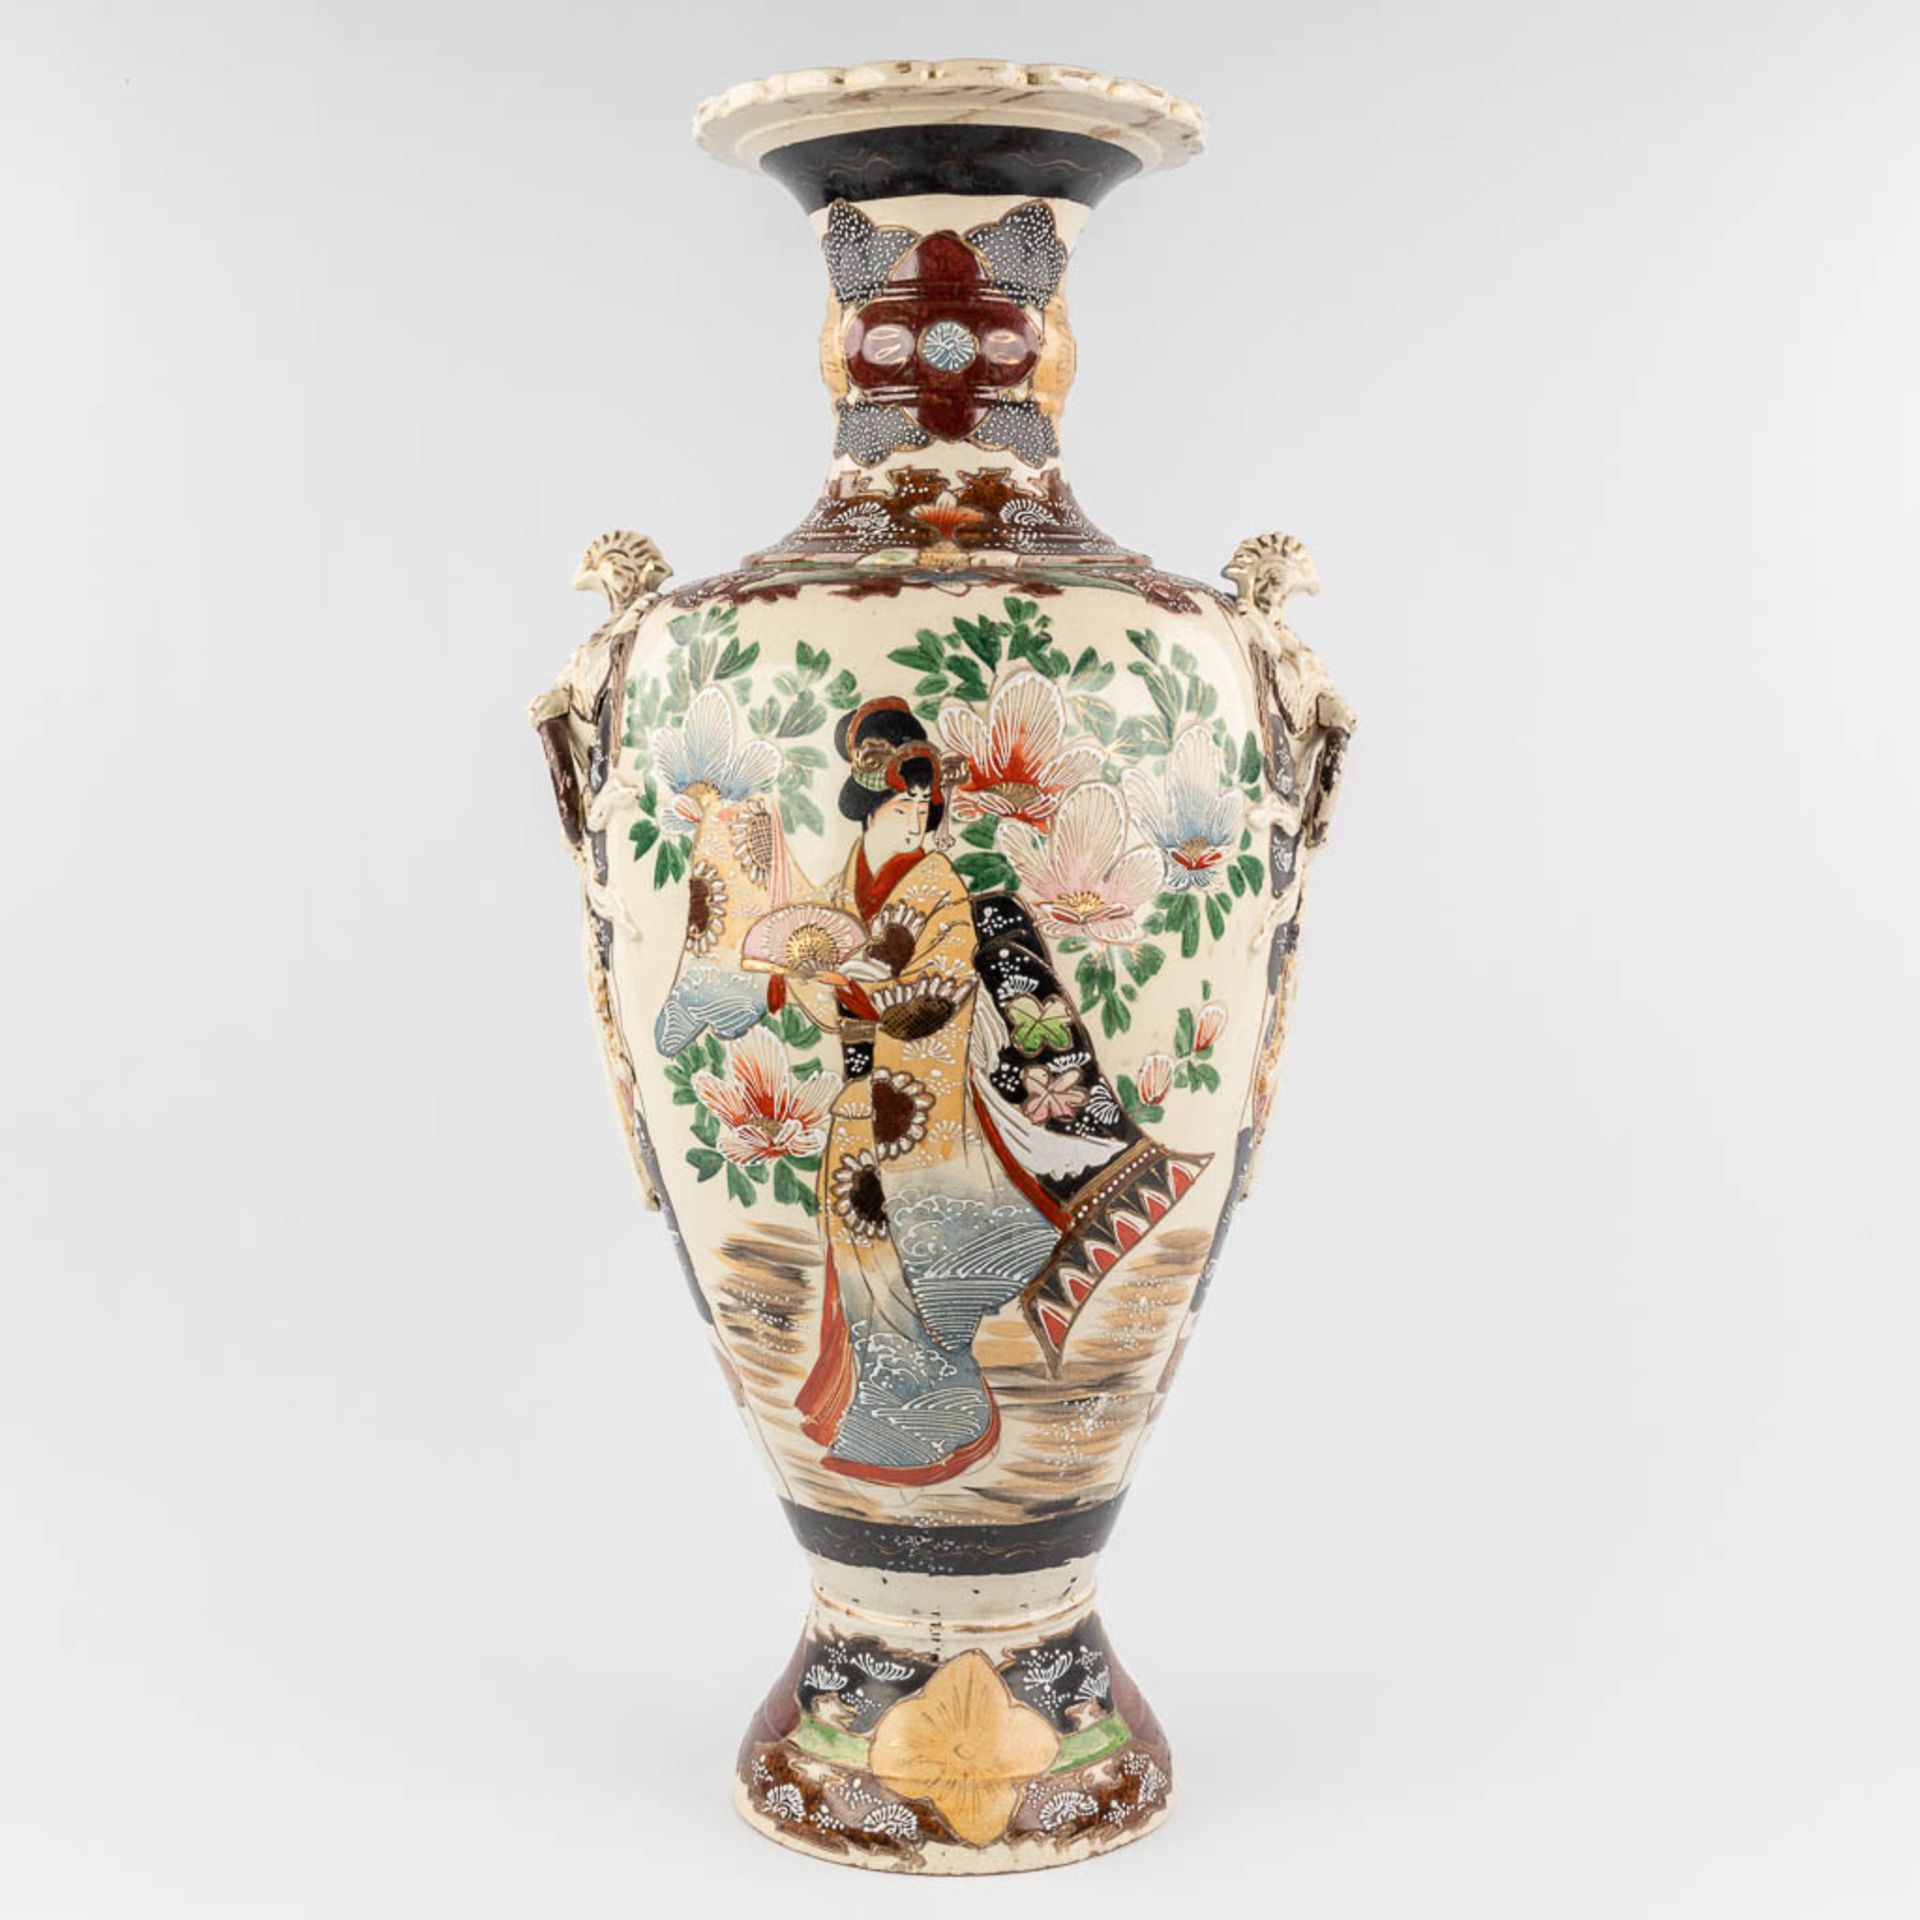 A large and decorative Japanese Satsuma vase. 20th C. (H:80 x D:32 cm) - Image 5 of 16